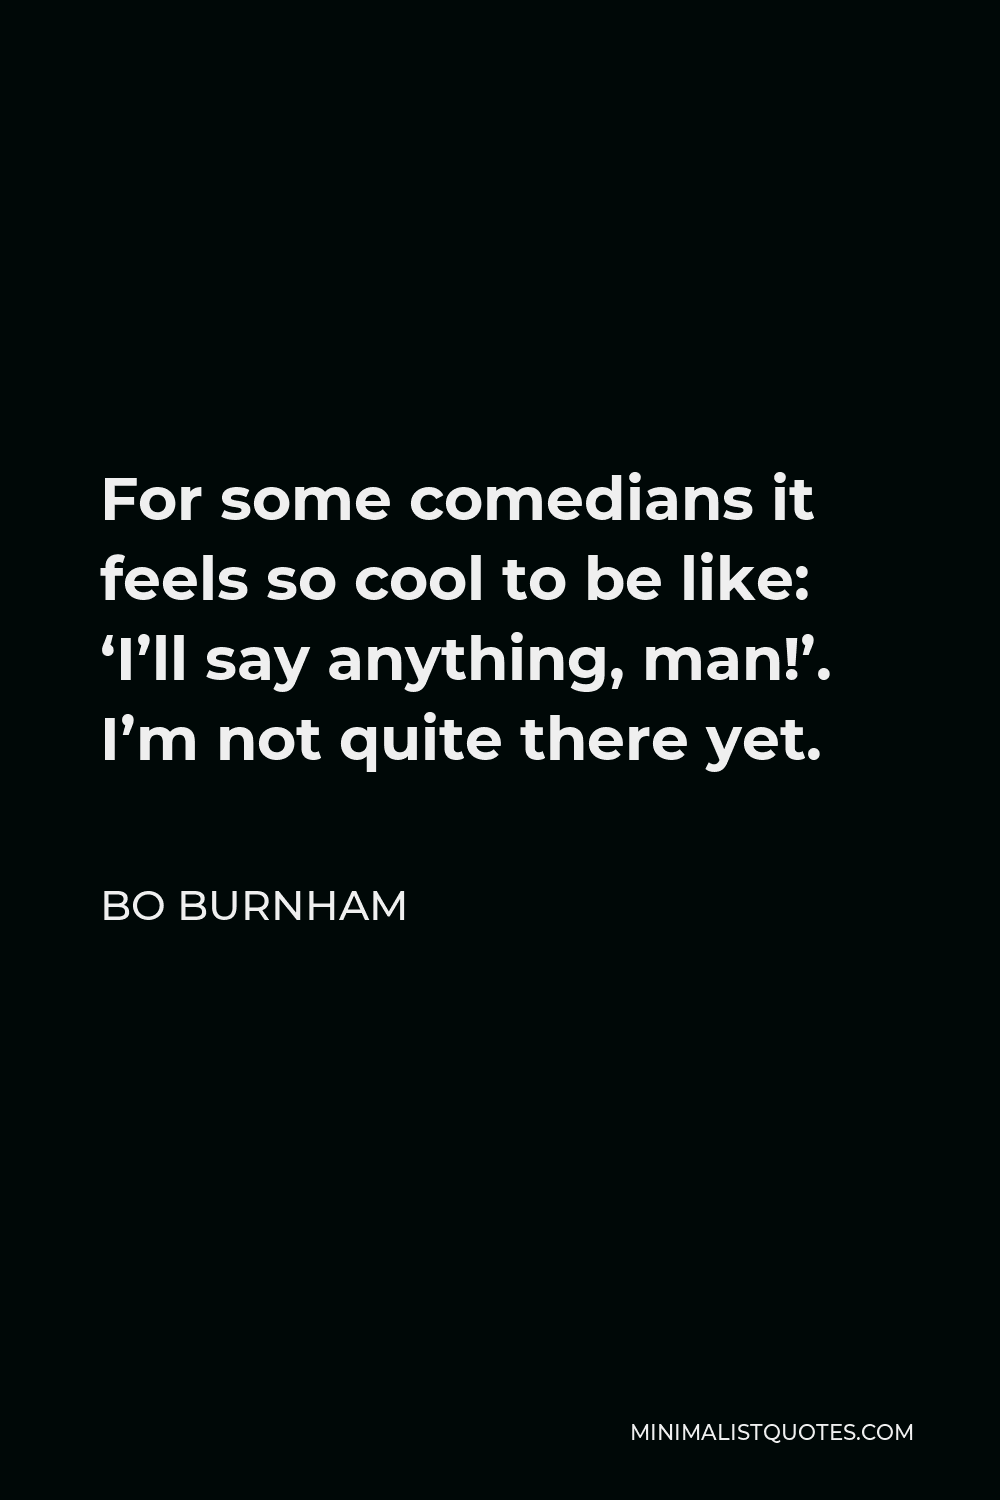 Bo Burnham Quote - For some comedians it feels so cool to be like: ‘I’ll say anything, man!’. I’m not quite there yet.